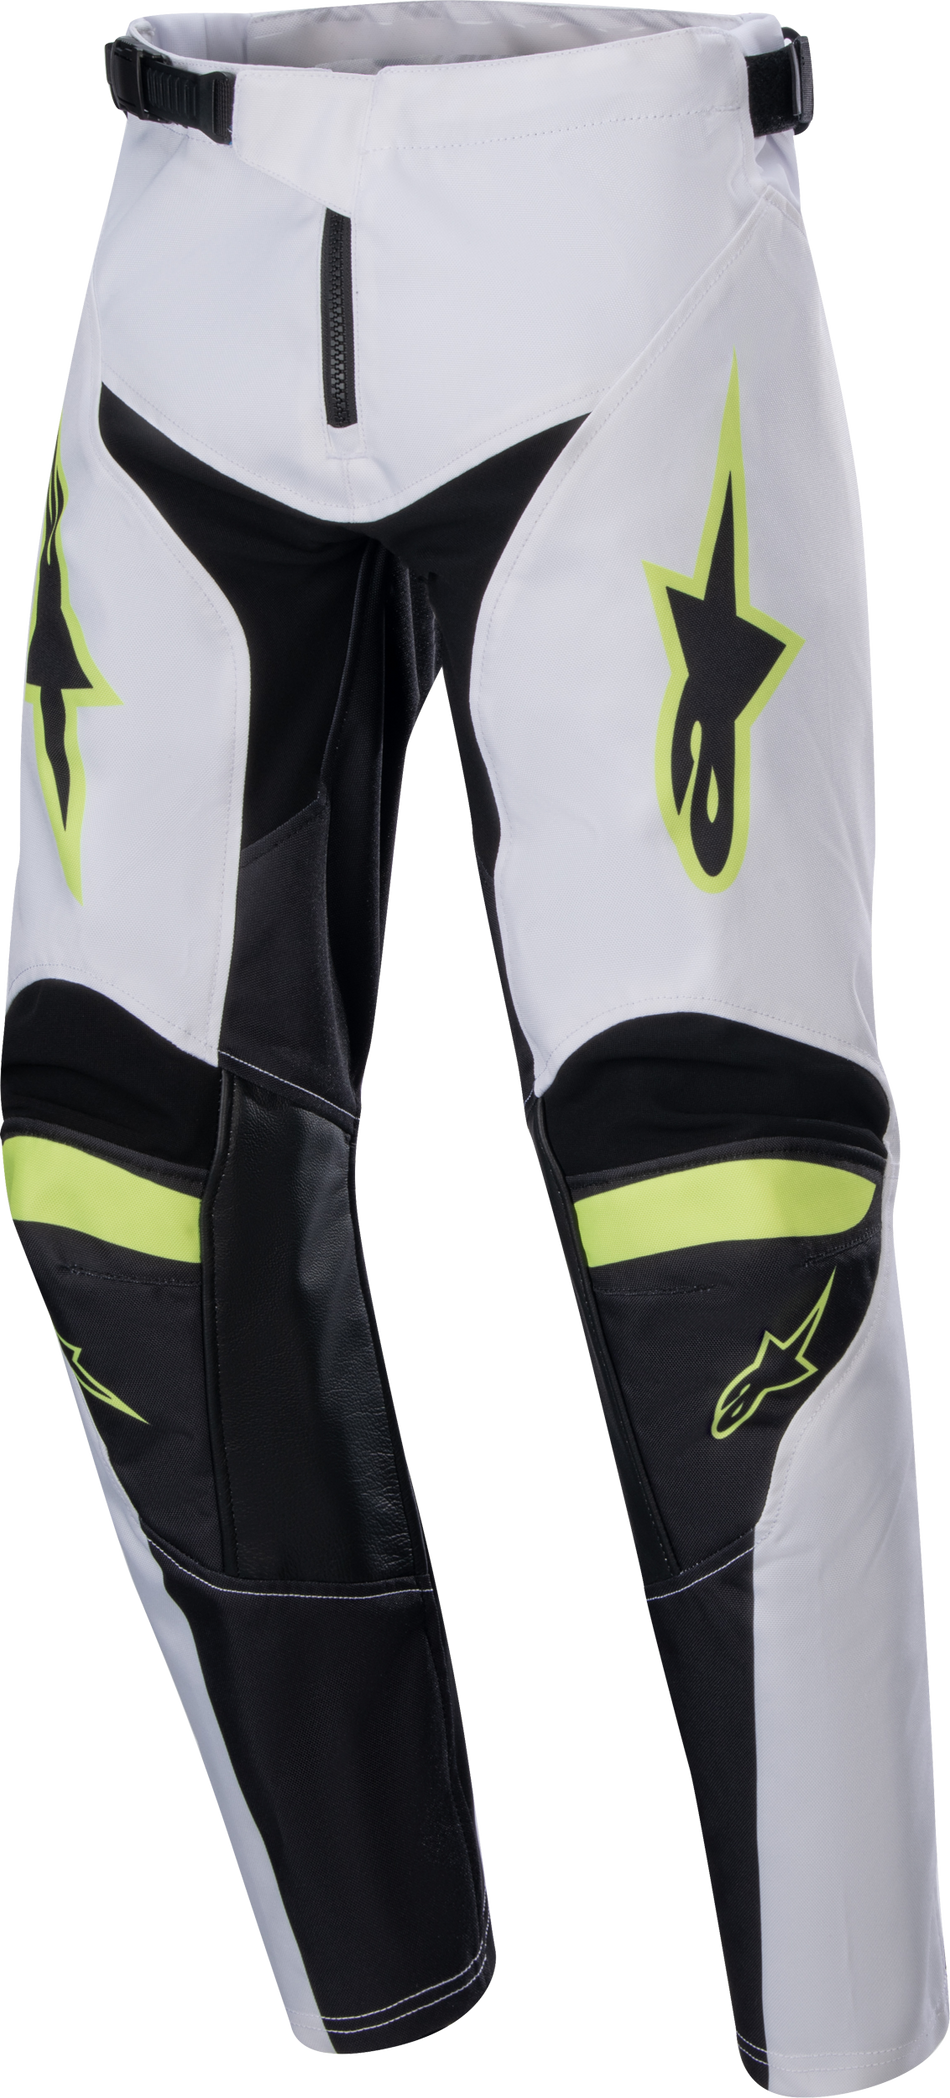 ALPINESTARS Youth Racer Lucent Pants Wht/Neon Rd/Ylw Fluo Sz 28 3743724-2029-28